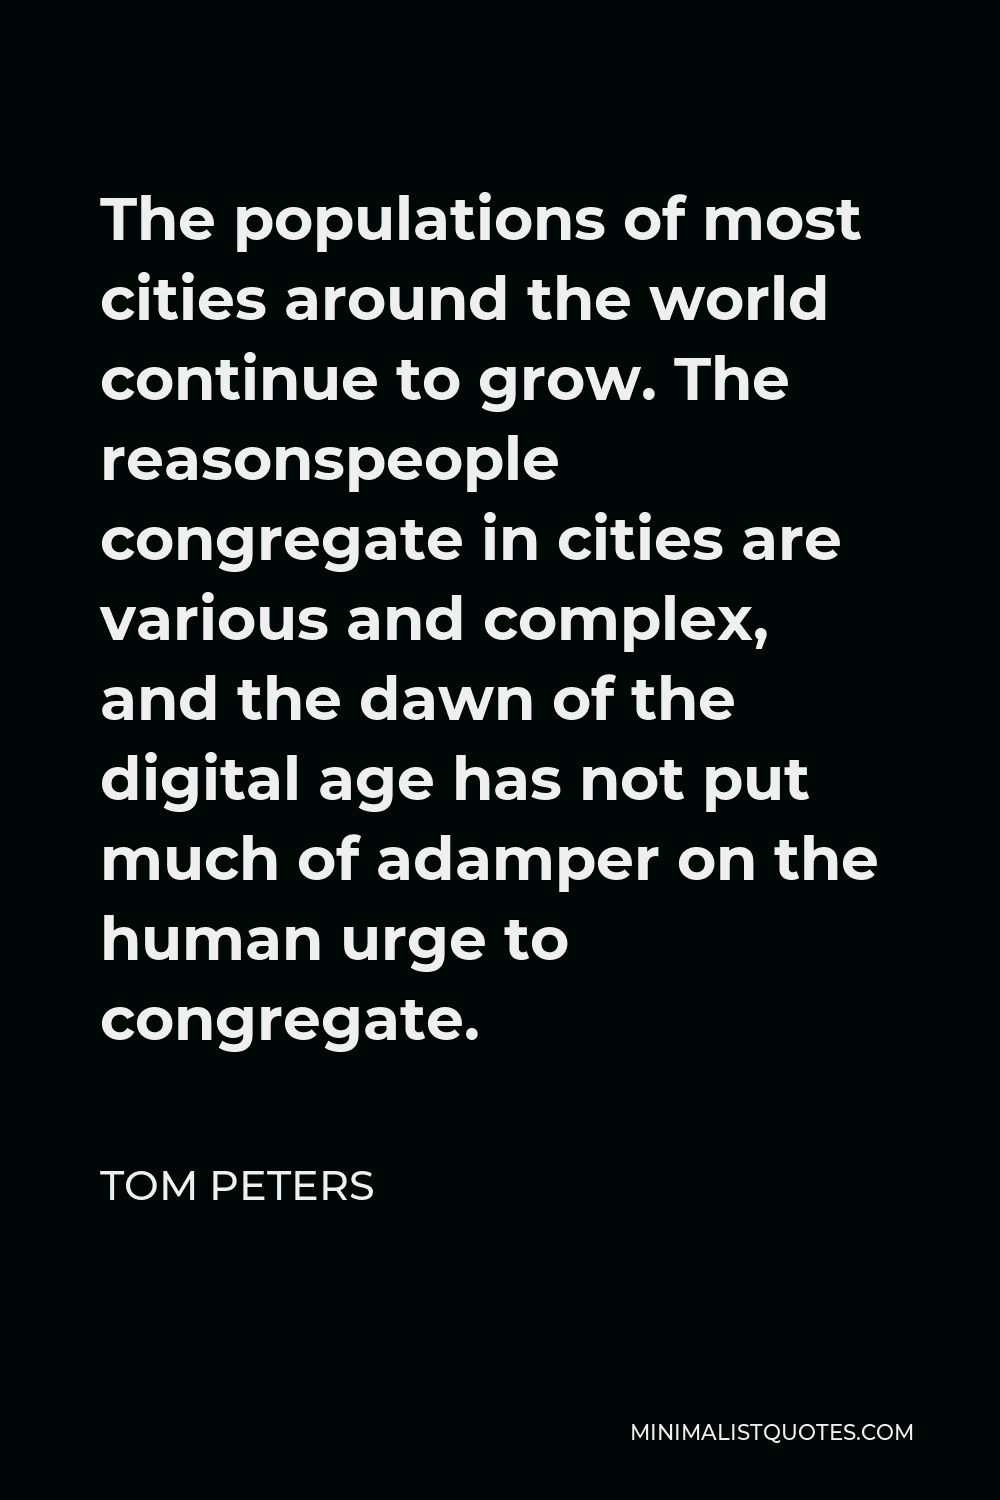 Tom Peters Quote - The populations of most cities around the world continue to grow. The reasonspeople congregate in cities are various and complex, and the dawn of the digital age has not put much of adamper on the human urge to congregate.